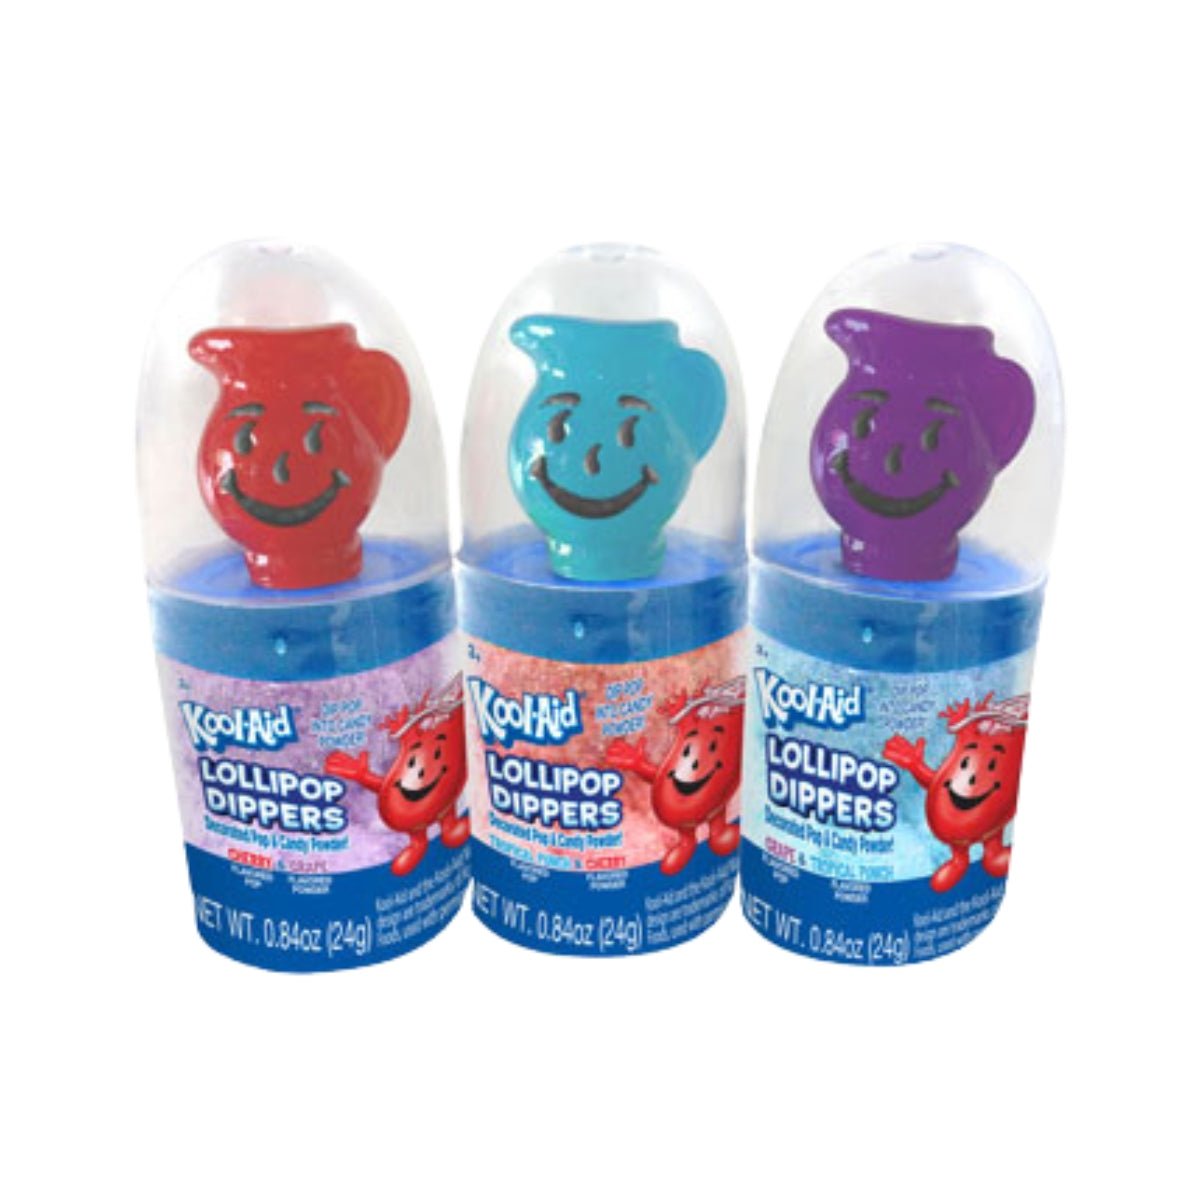 Kool-Aid Lollipop Dippers 24 g - Fast Candy